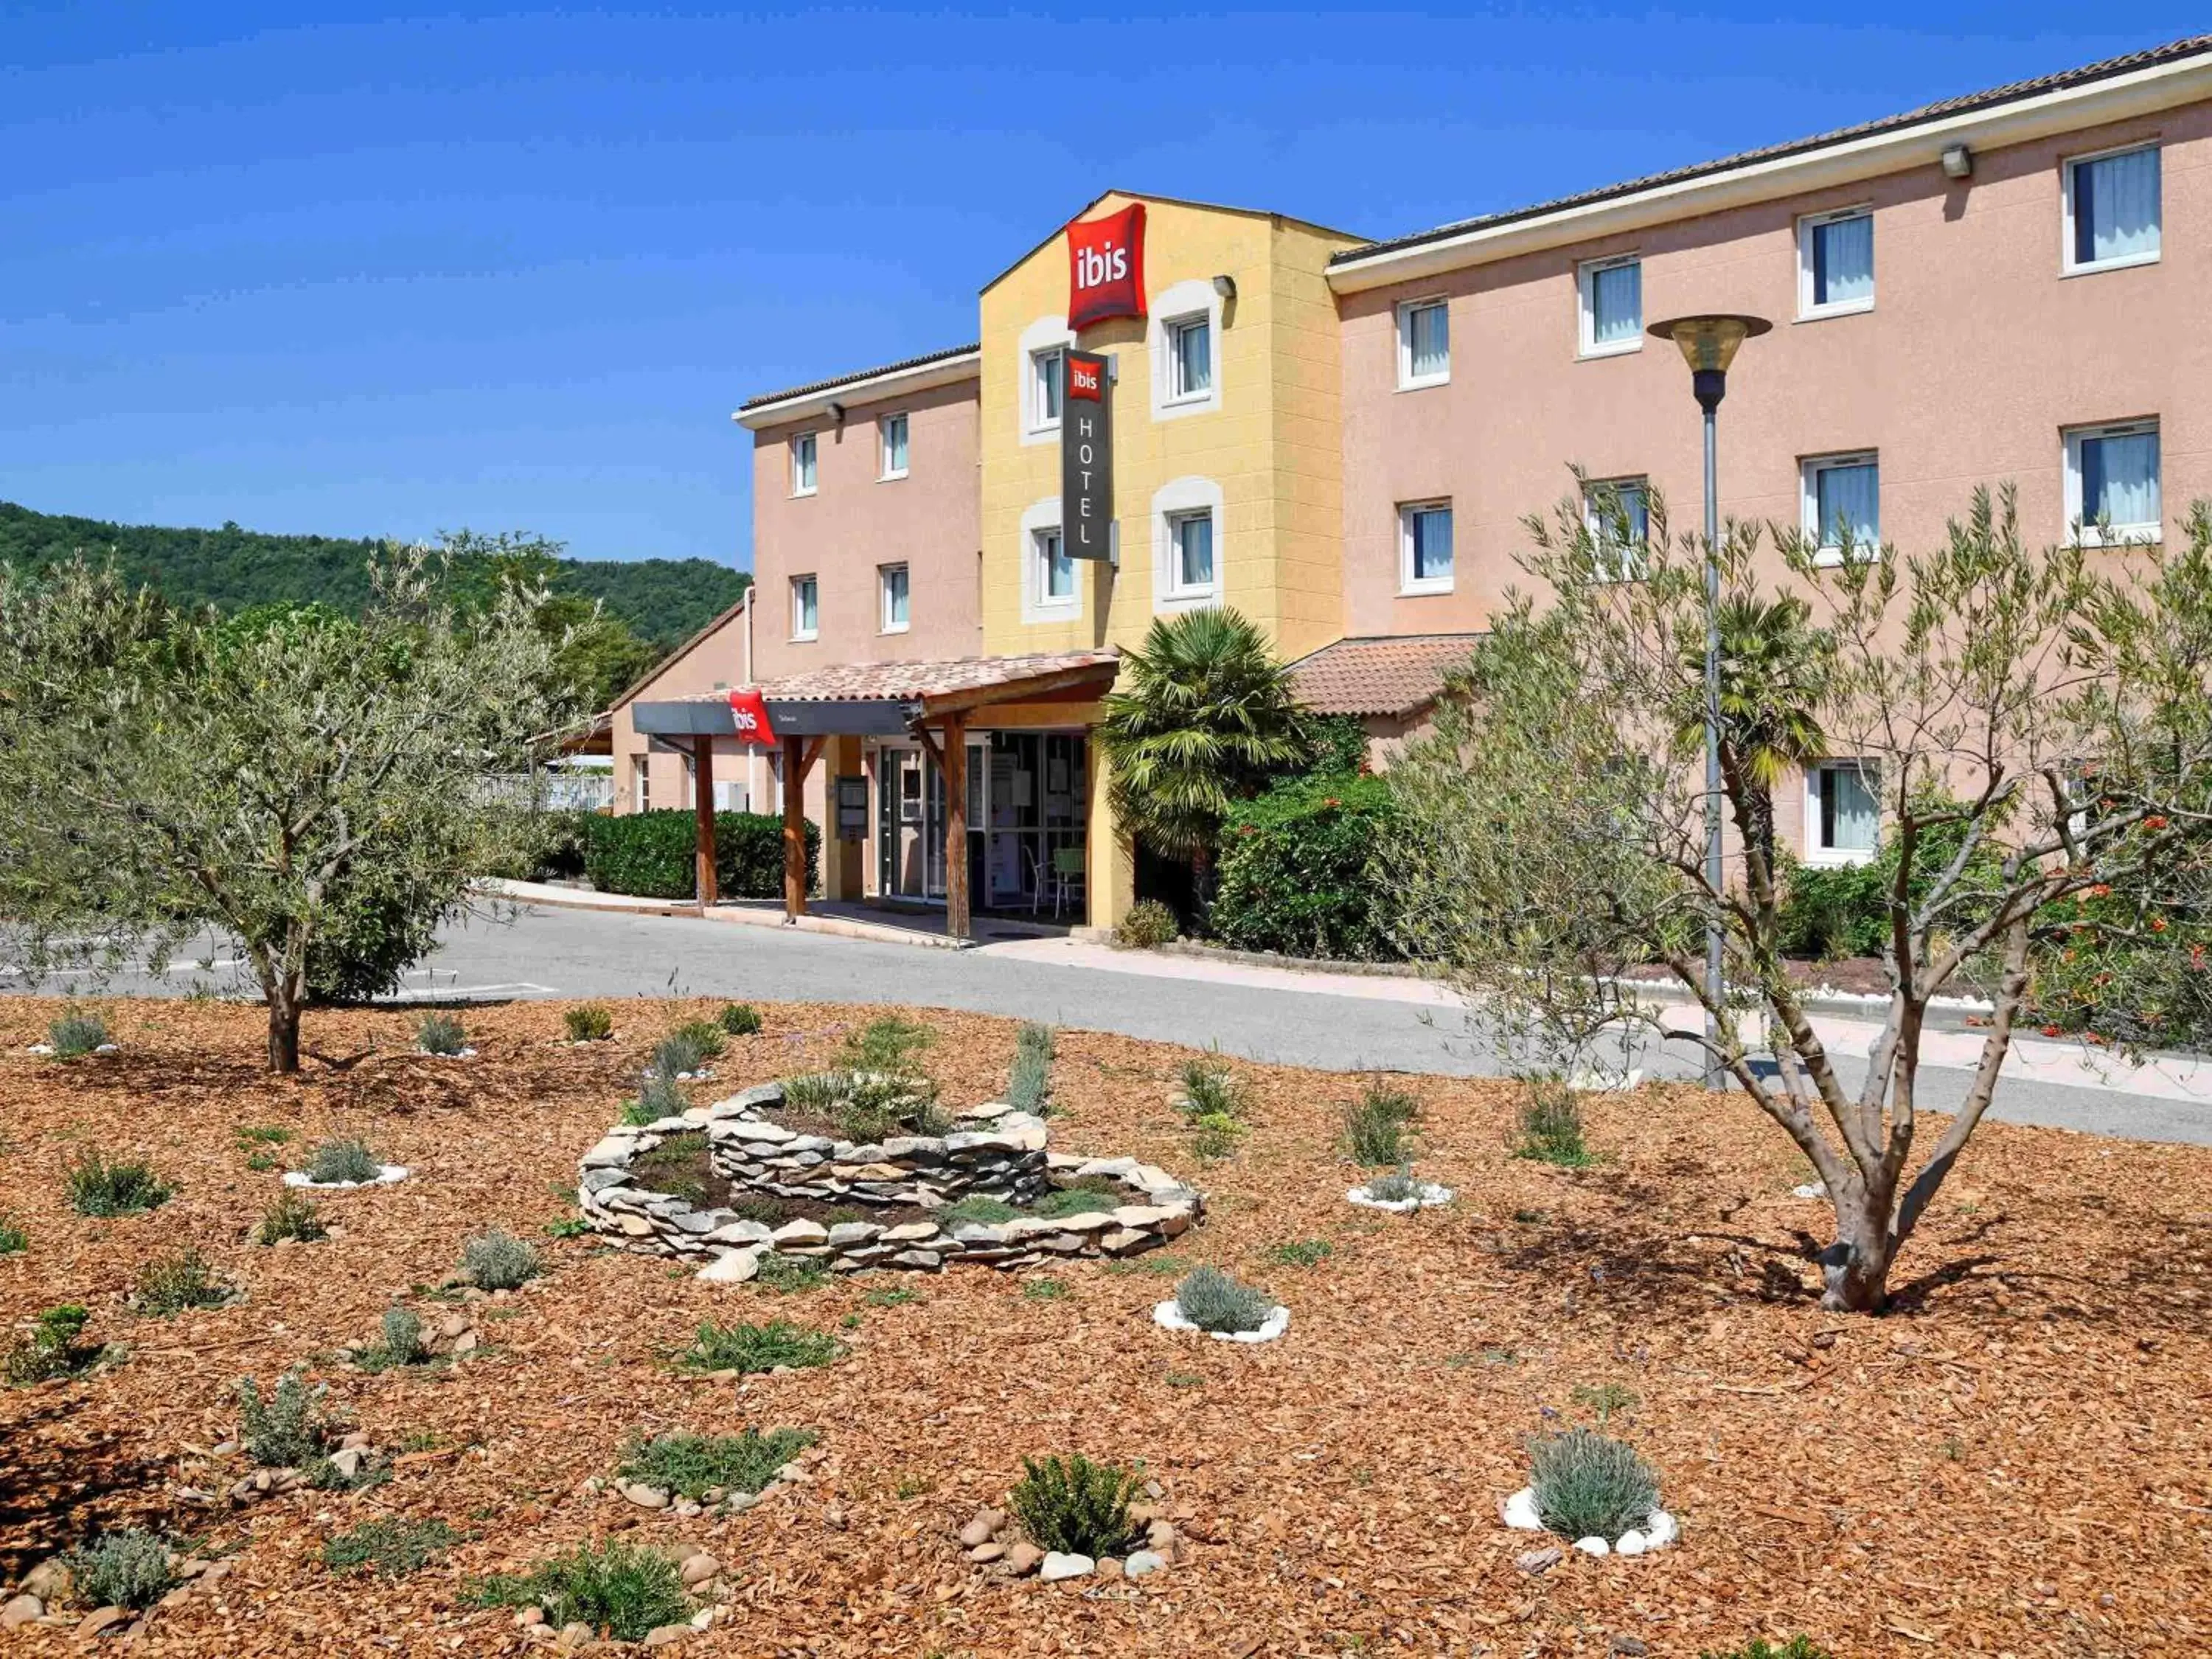 Other, Property Building in ibis Sisteron